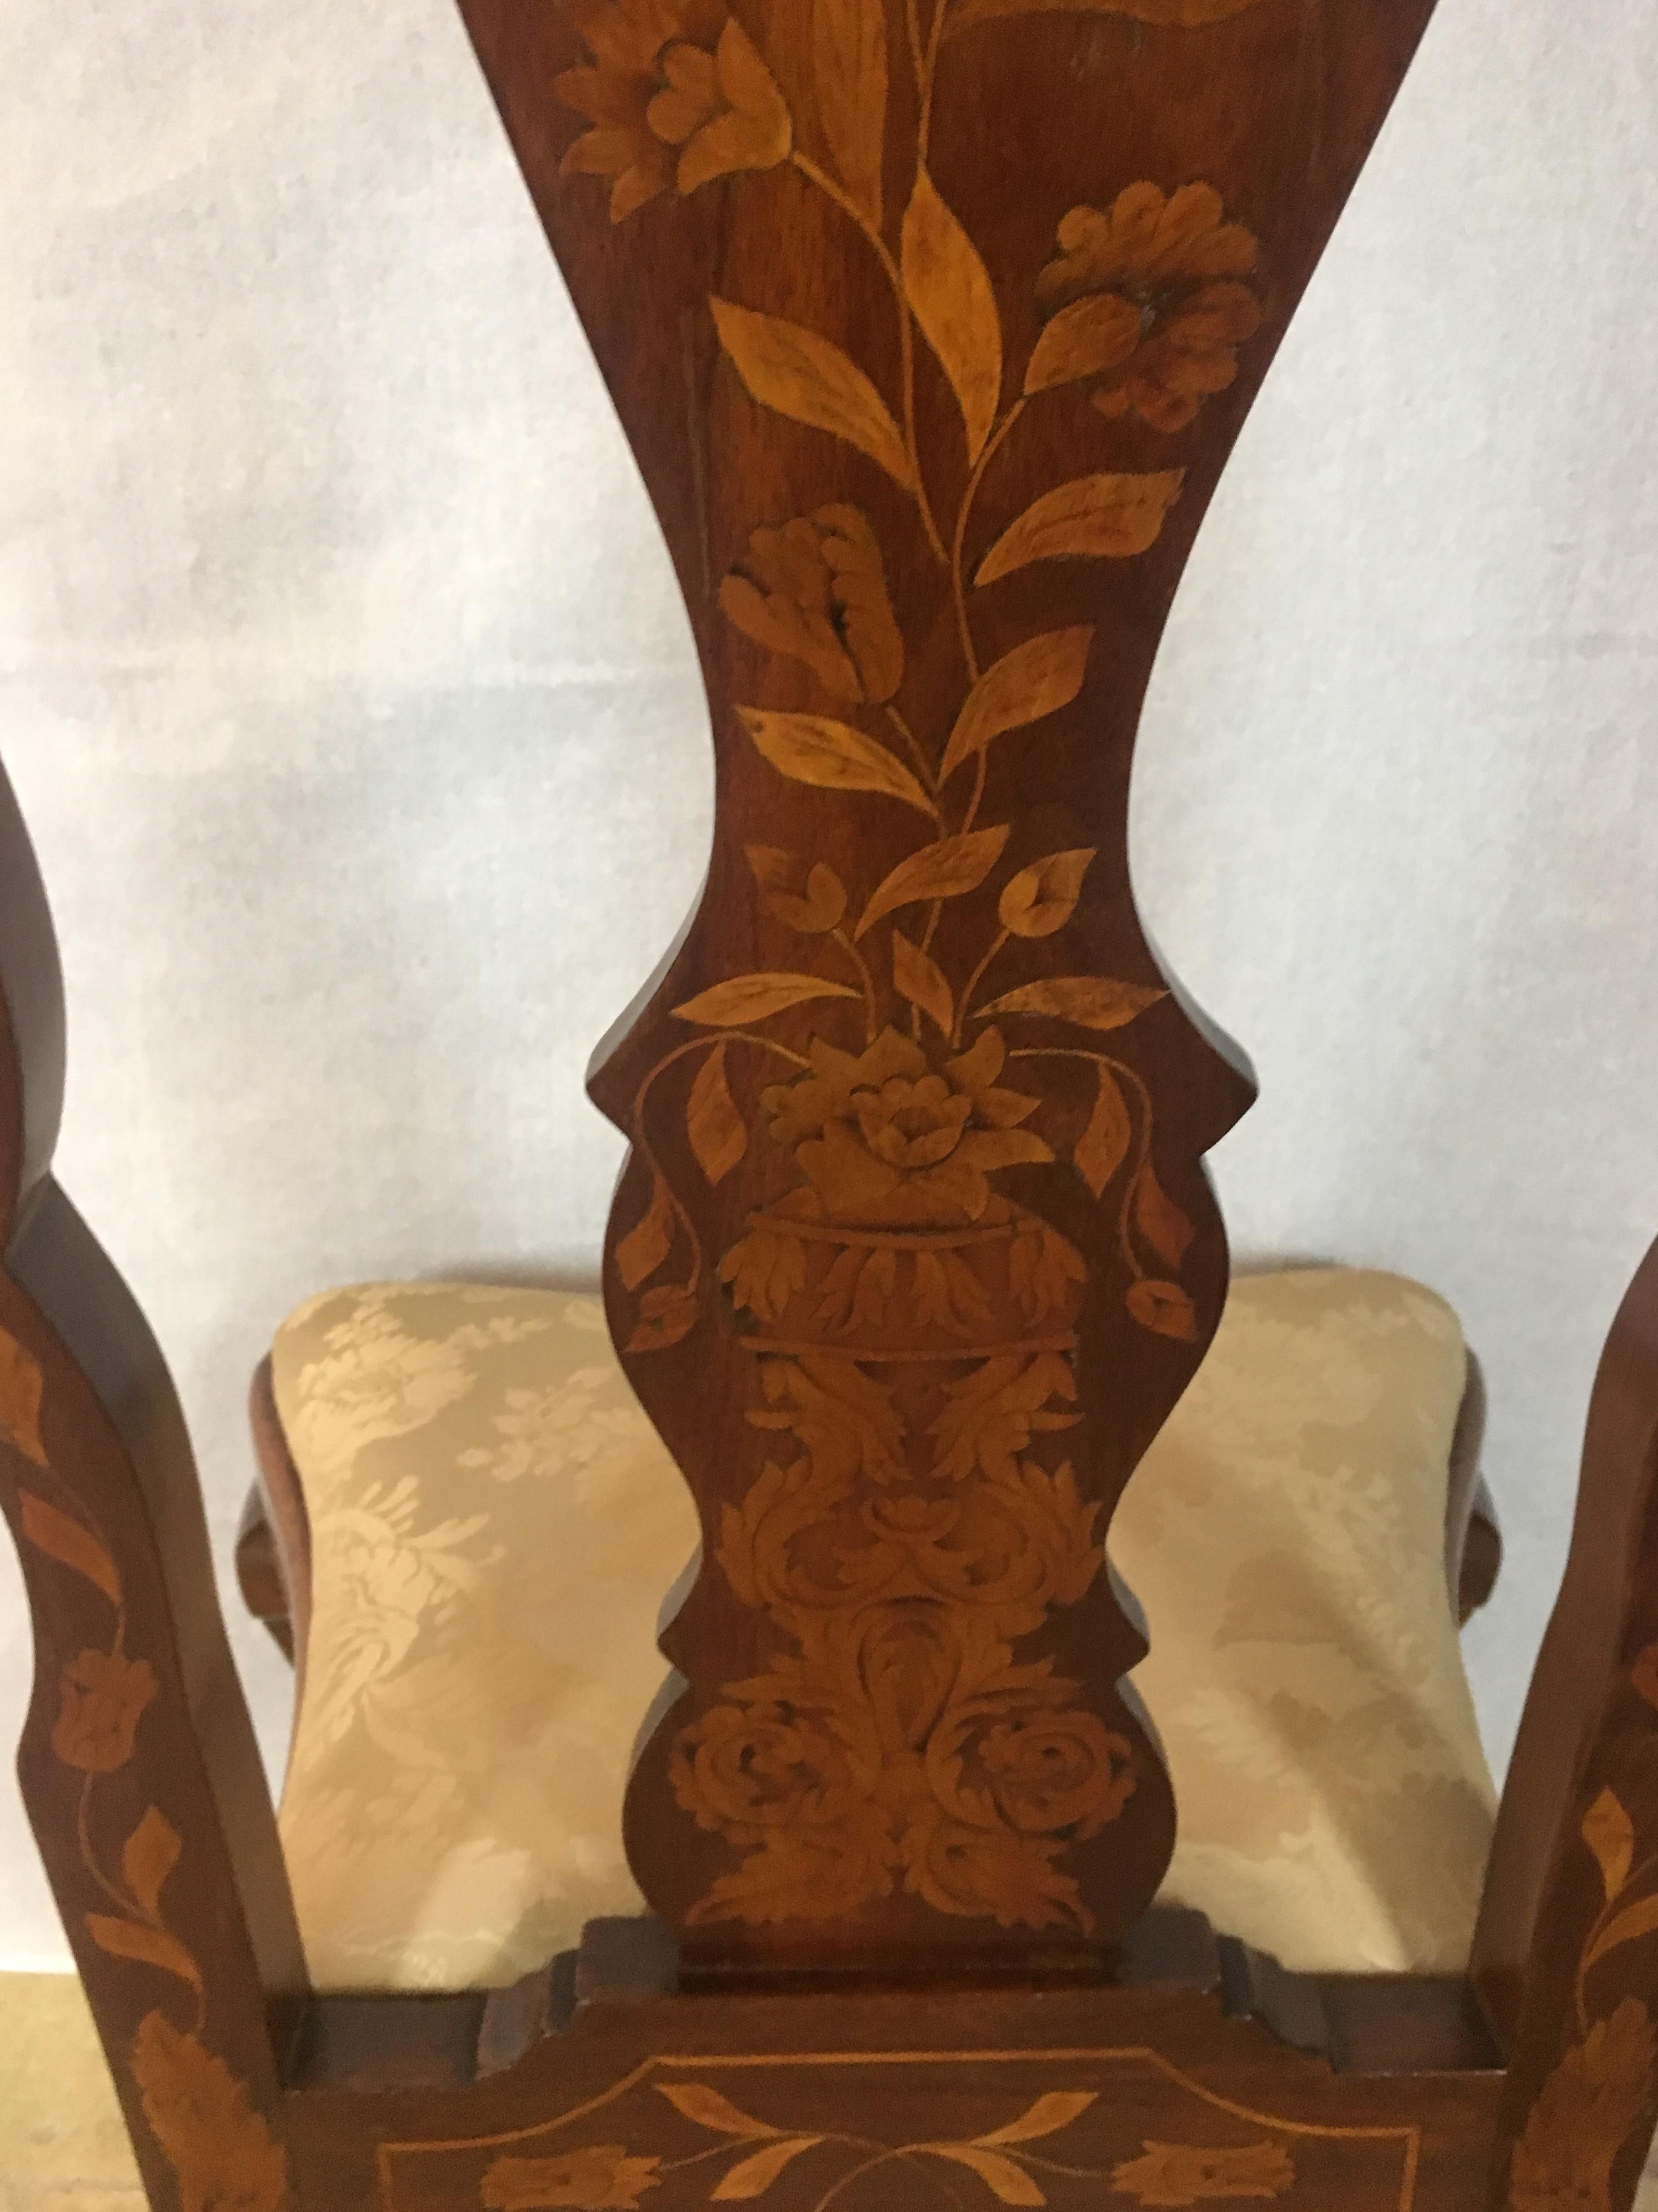 Very fine set of four 19th century Dutch walnut dining chairs in the Queen Anne style with vase shaped backs, all profusely inlaid with Dutch marquetry. The front legs of cabriole form. Superb exotic wood marquetry inlays overall depicting flowering